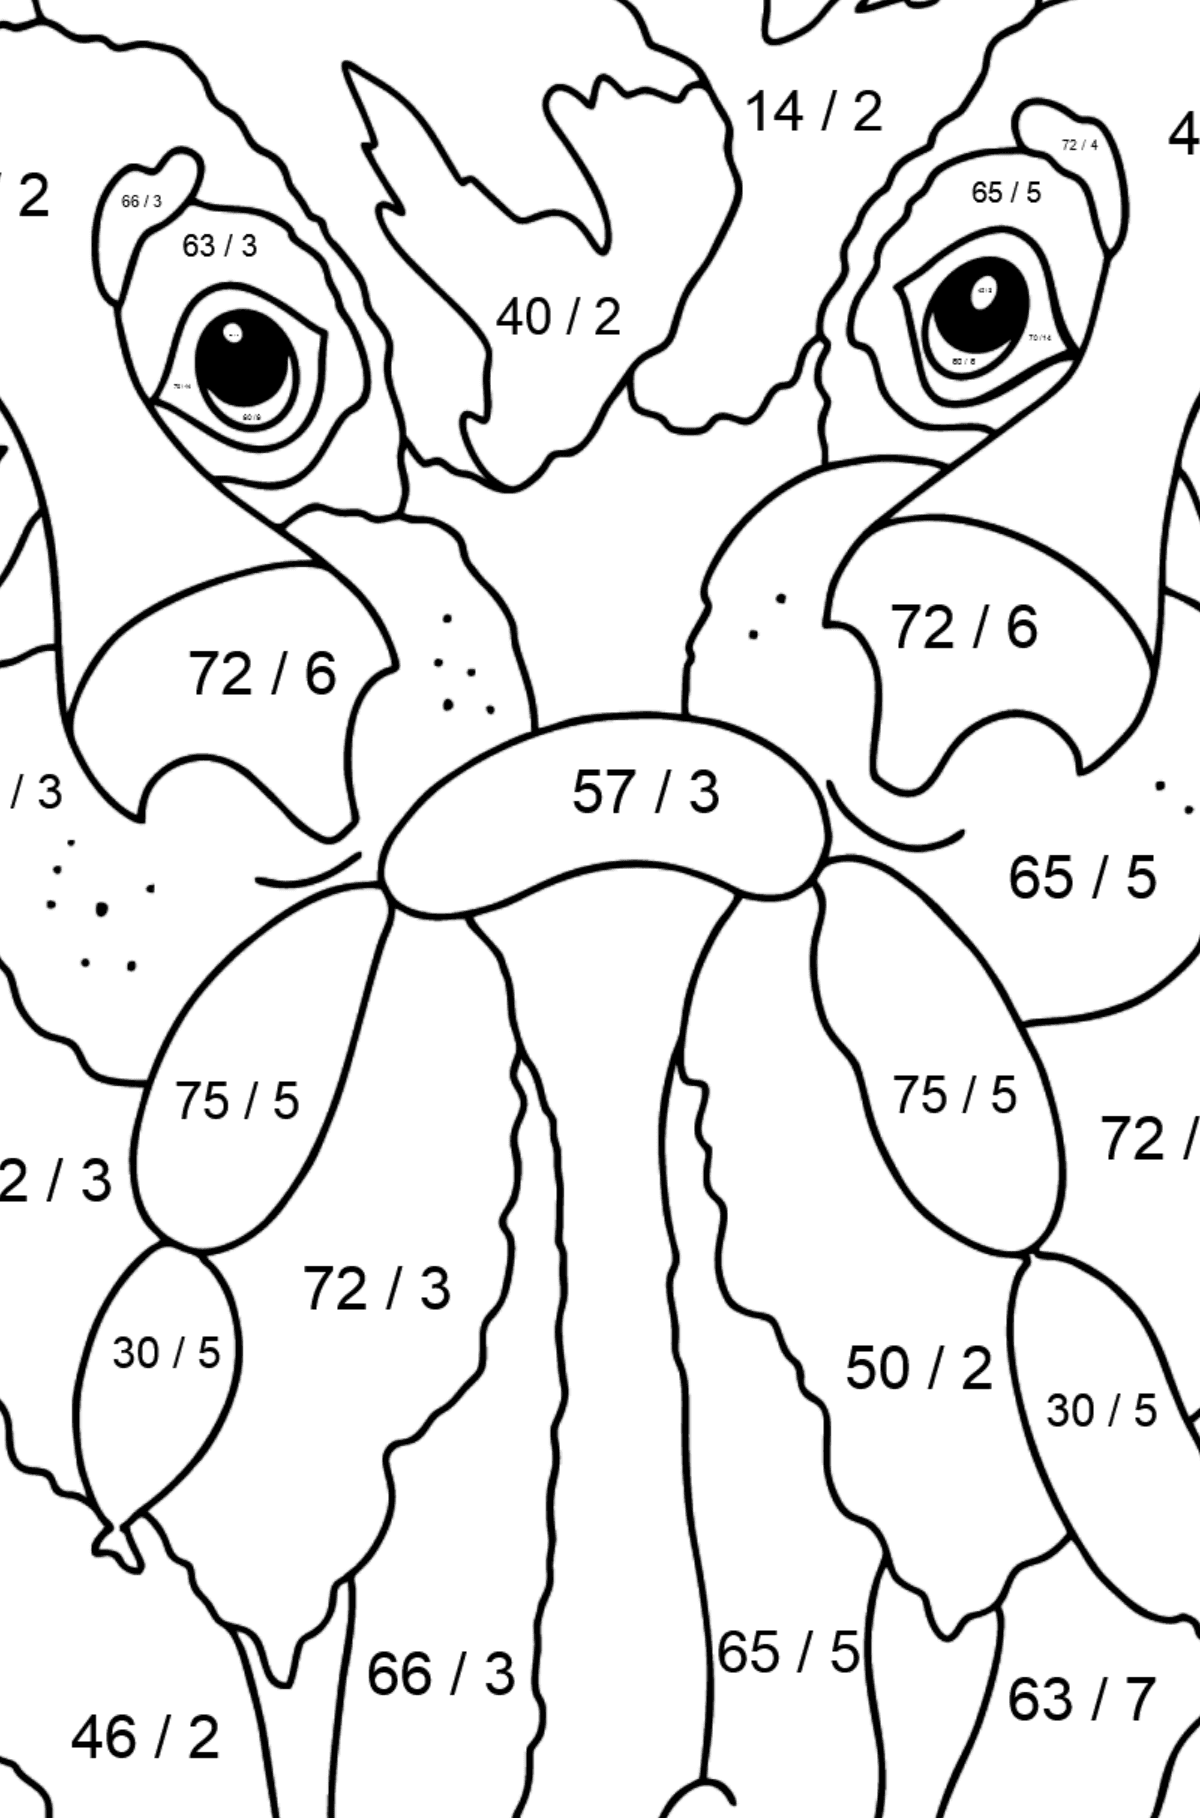 Coloring Page - Dogs Found Sausages - Math Coloring - Division for Kids